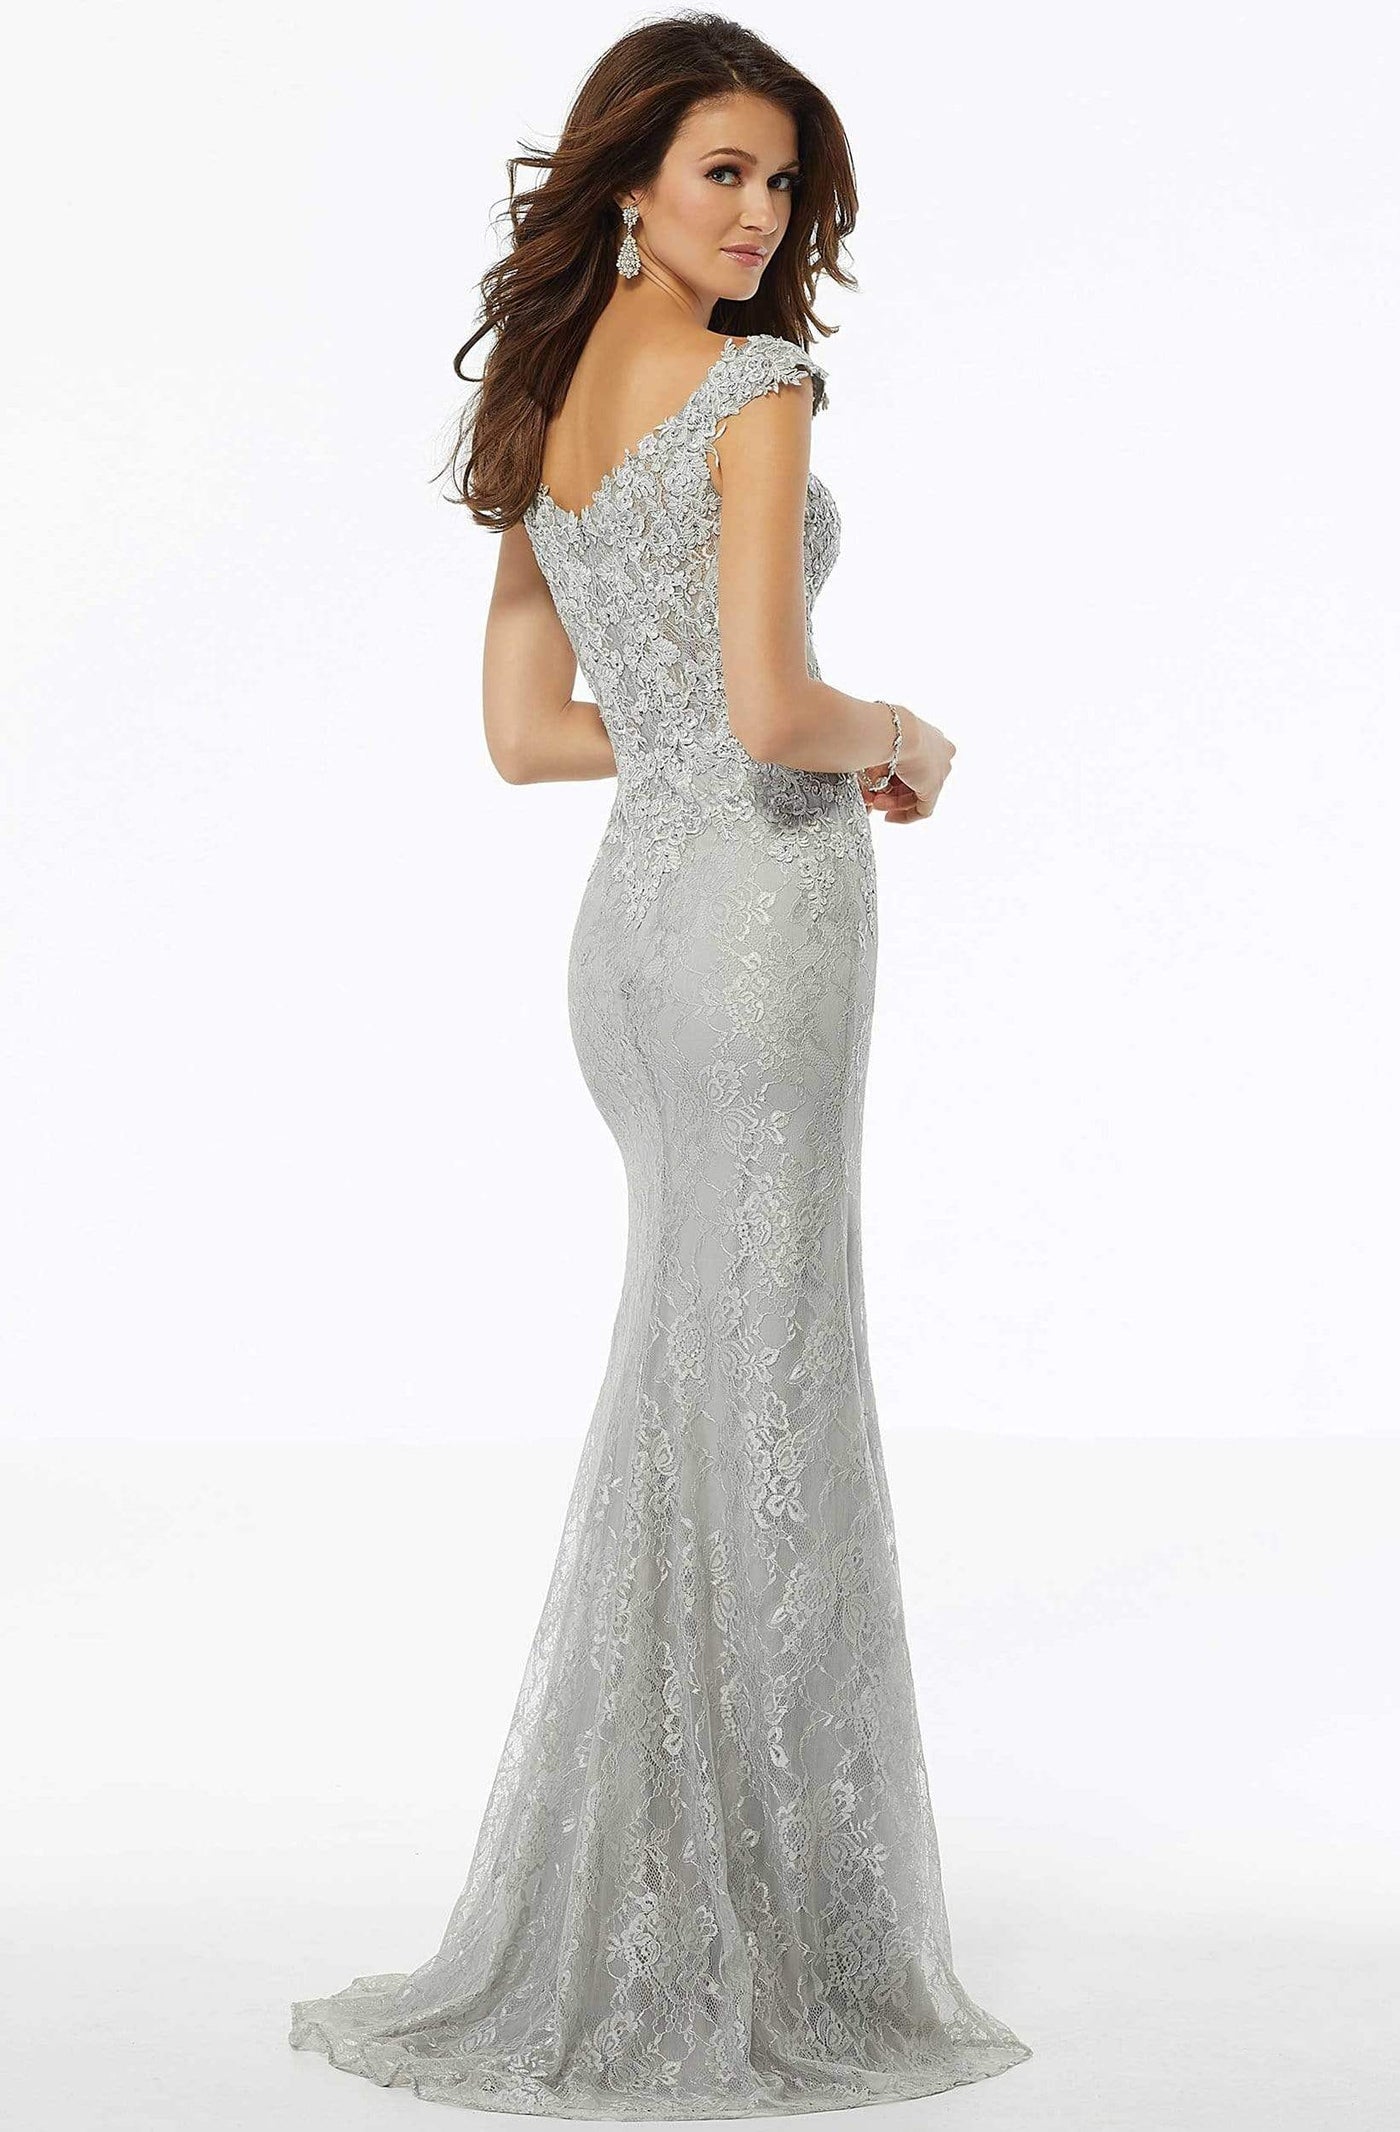 MGNY By Mori Lee - 72111 Beaded Lace Deep V-neck Trumpet Dress Mother of the Bride Dresses